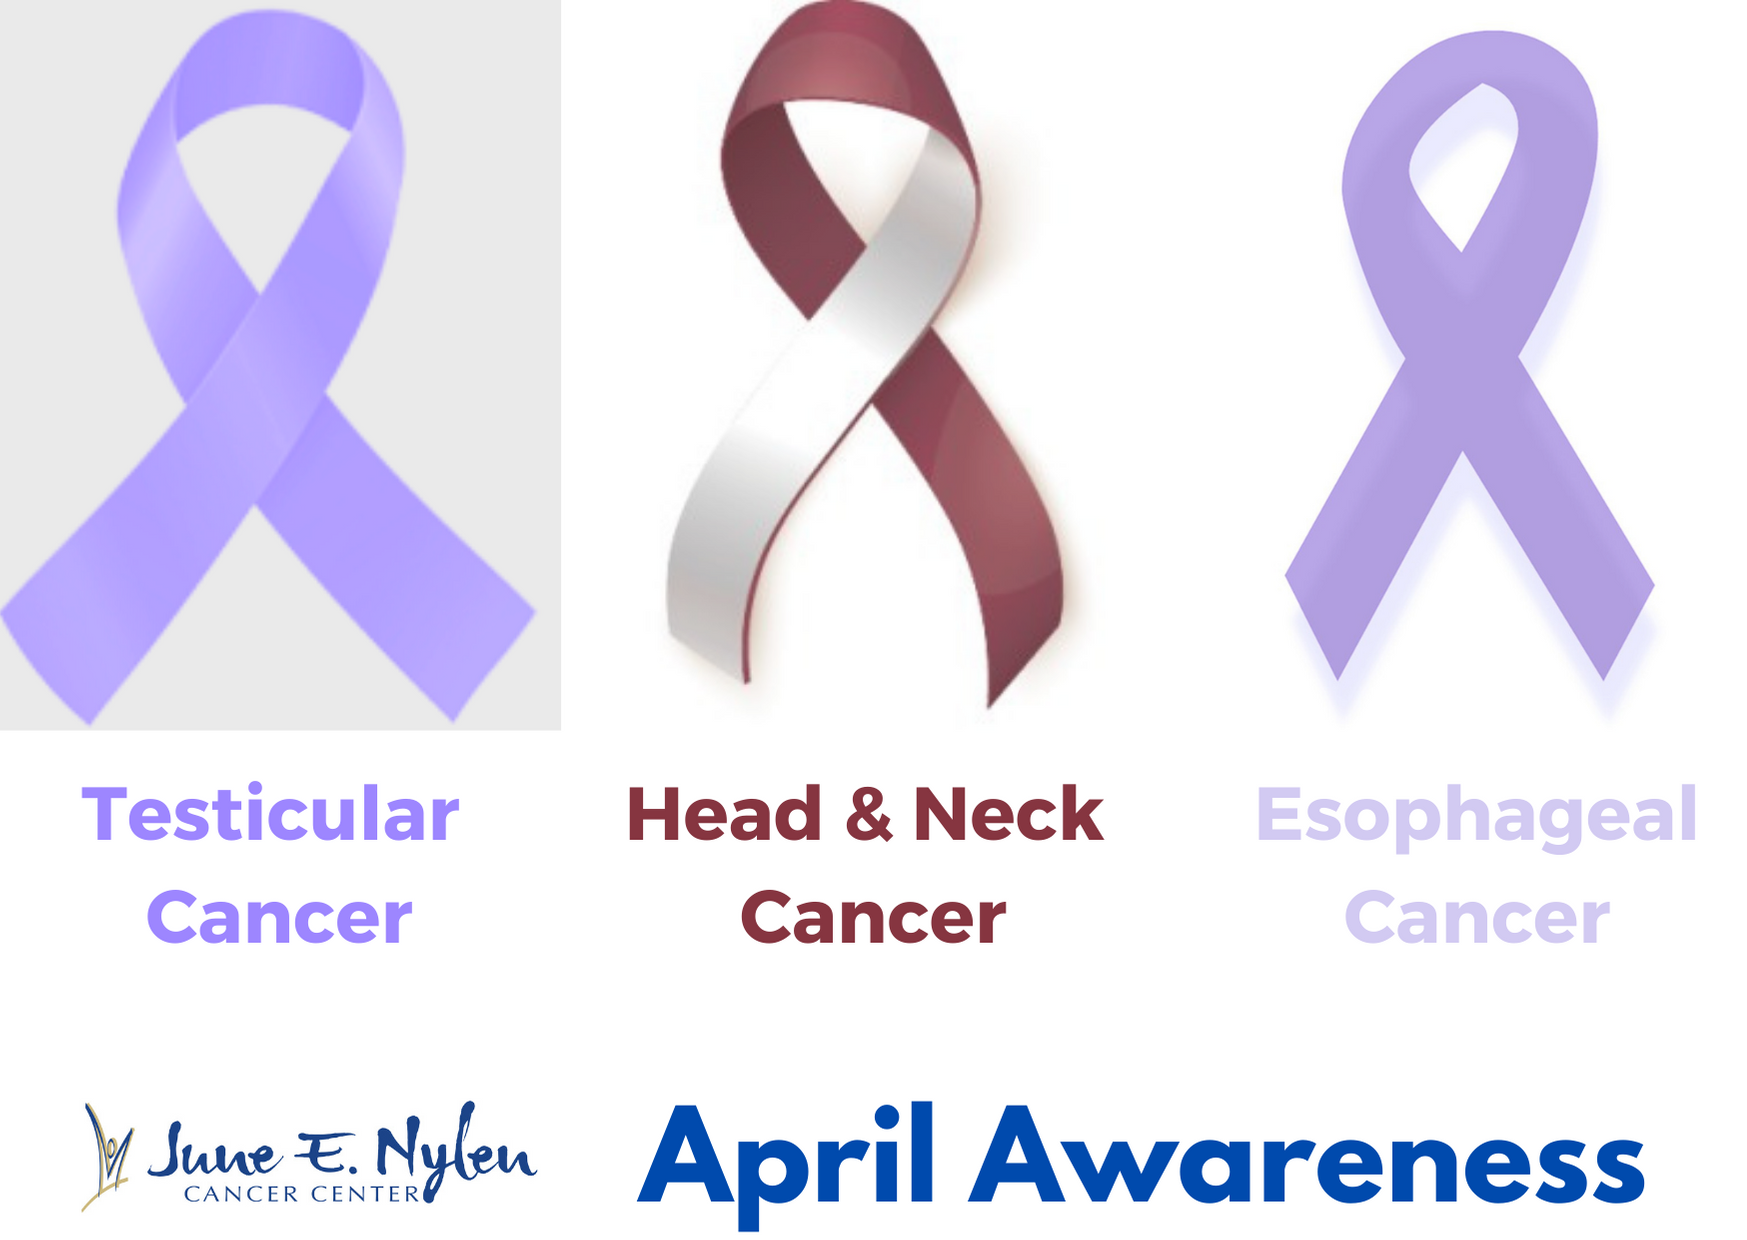 April is Awareness Month for Esophageal, Head & Neck, and Testicular